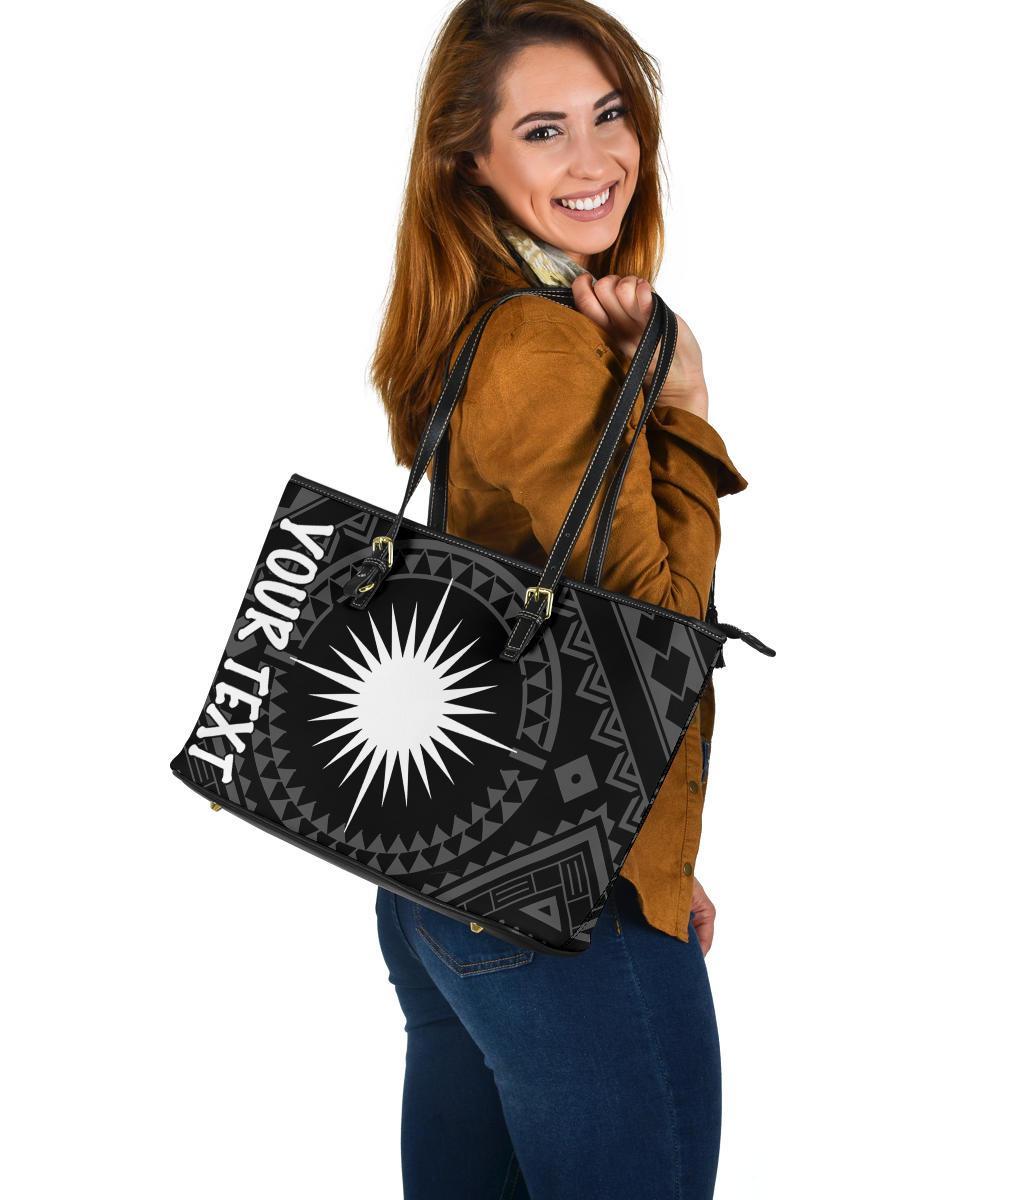 marshall-large-leather-tote-bag-marshall-seal-with-polynesian-tattoo-style-black